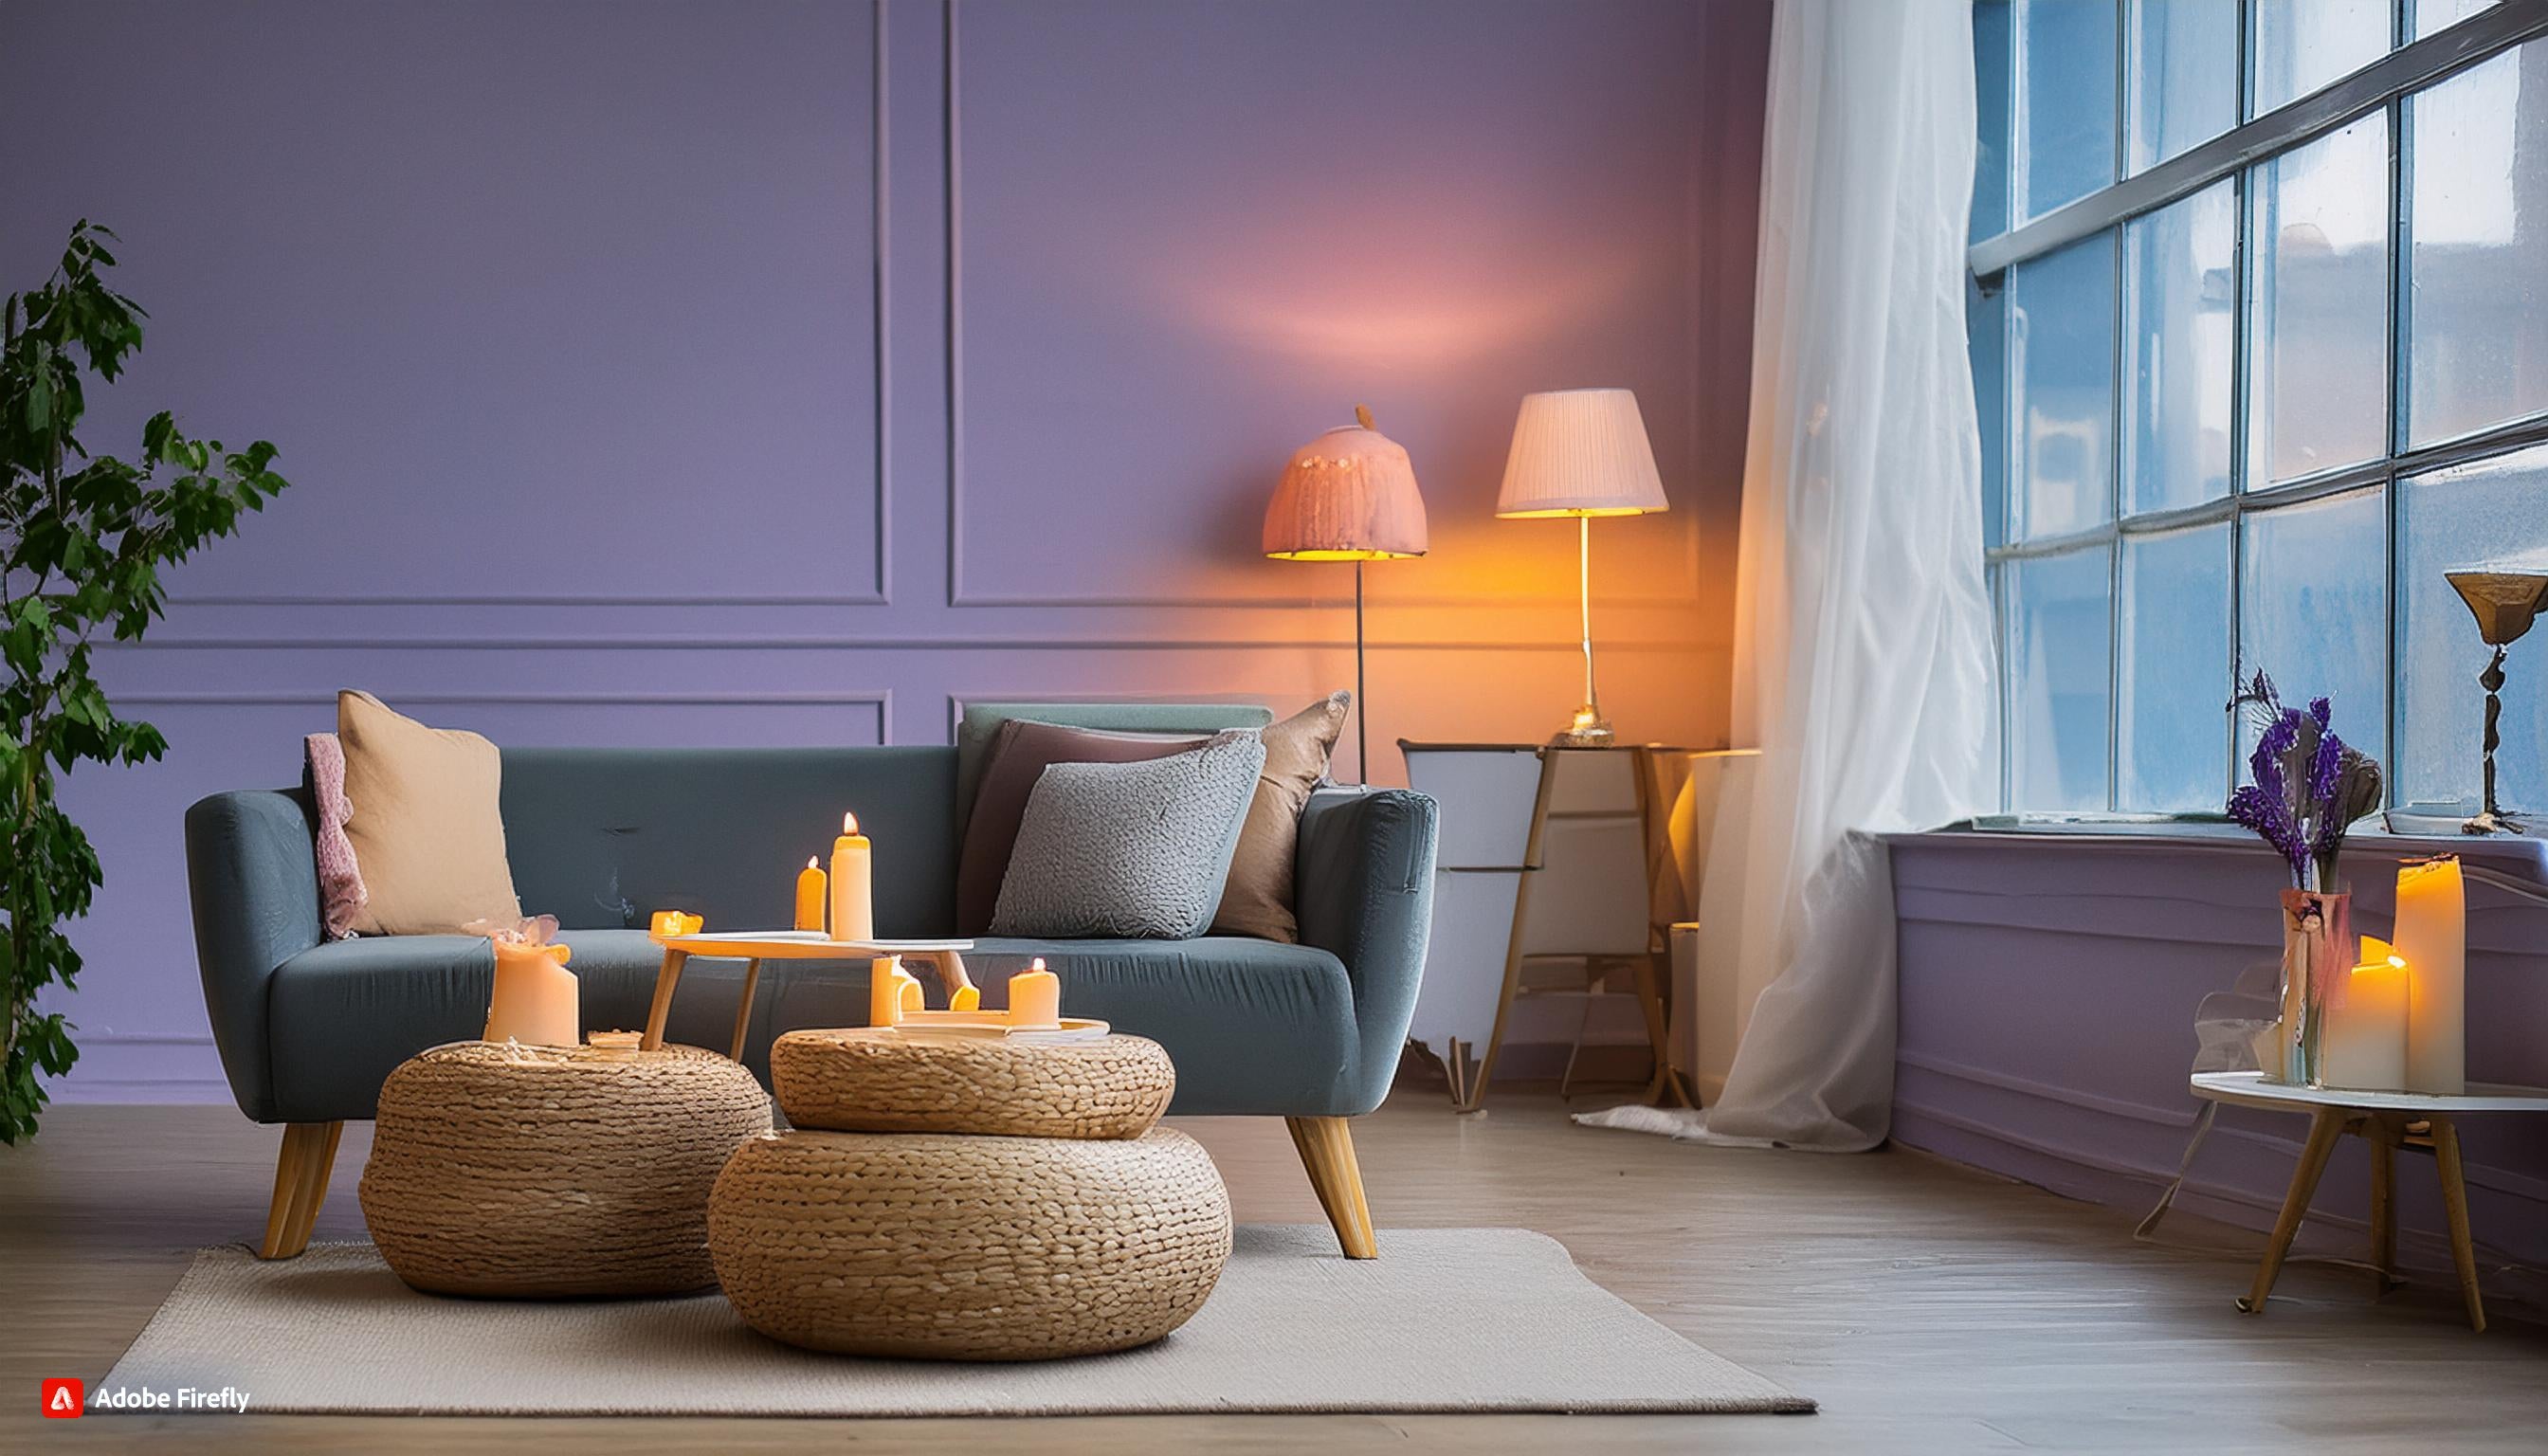 How to Create a Calming Atmosphere in Every Room